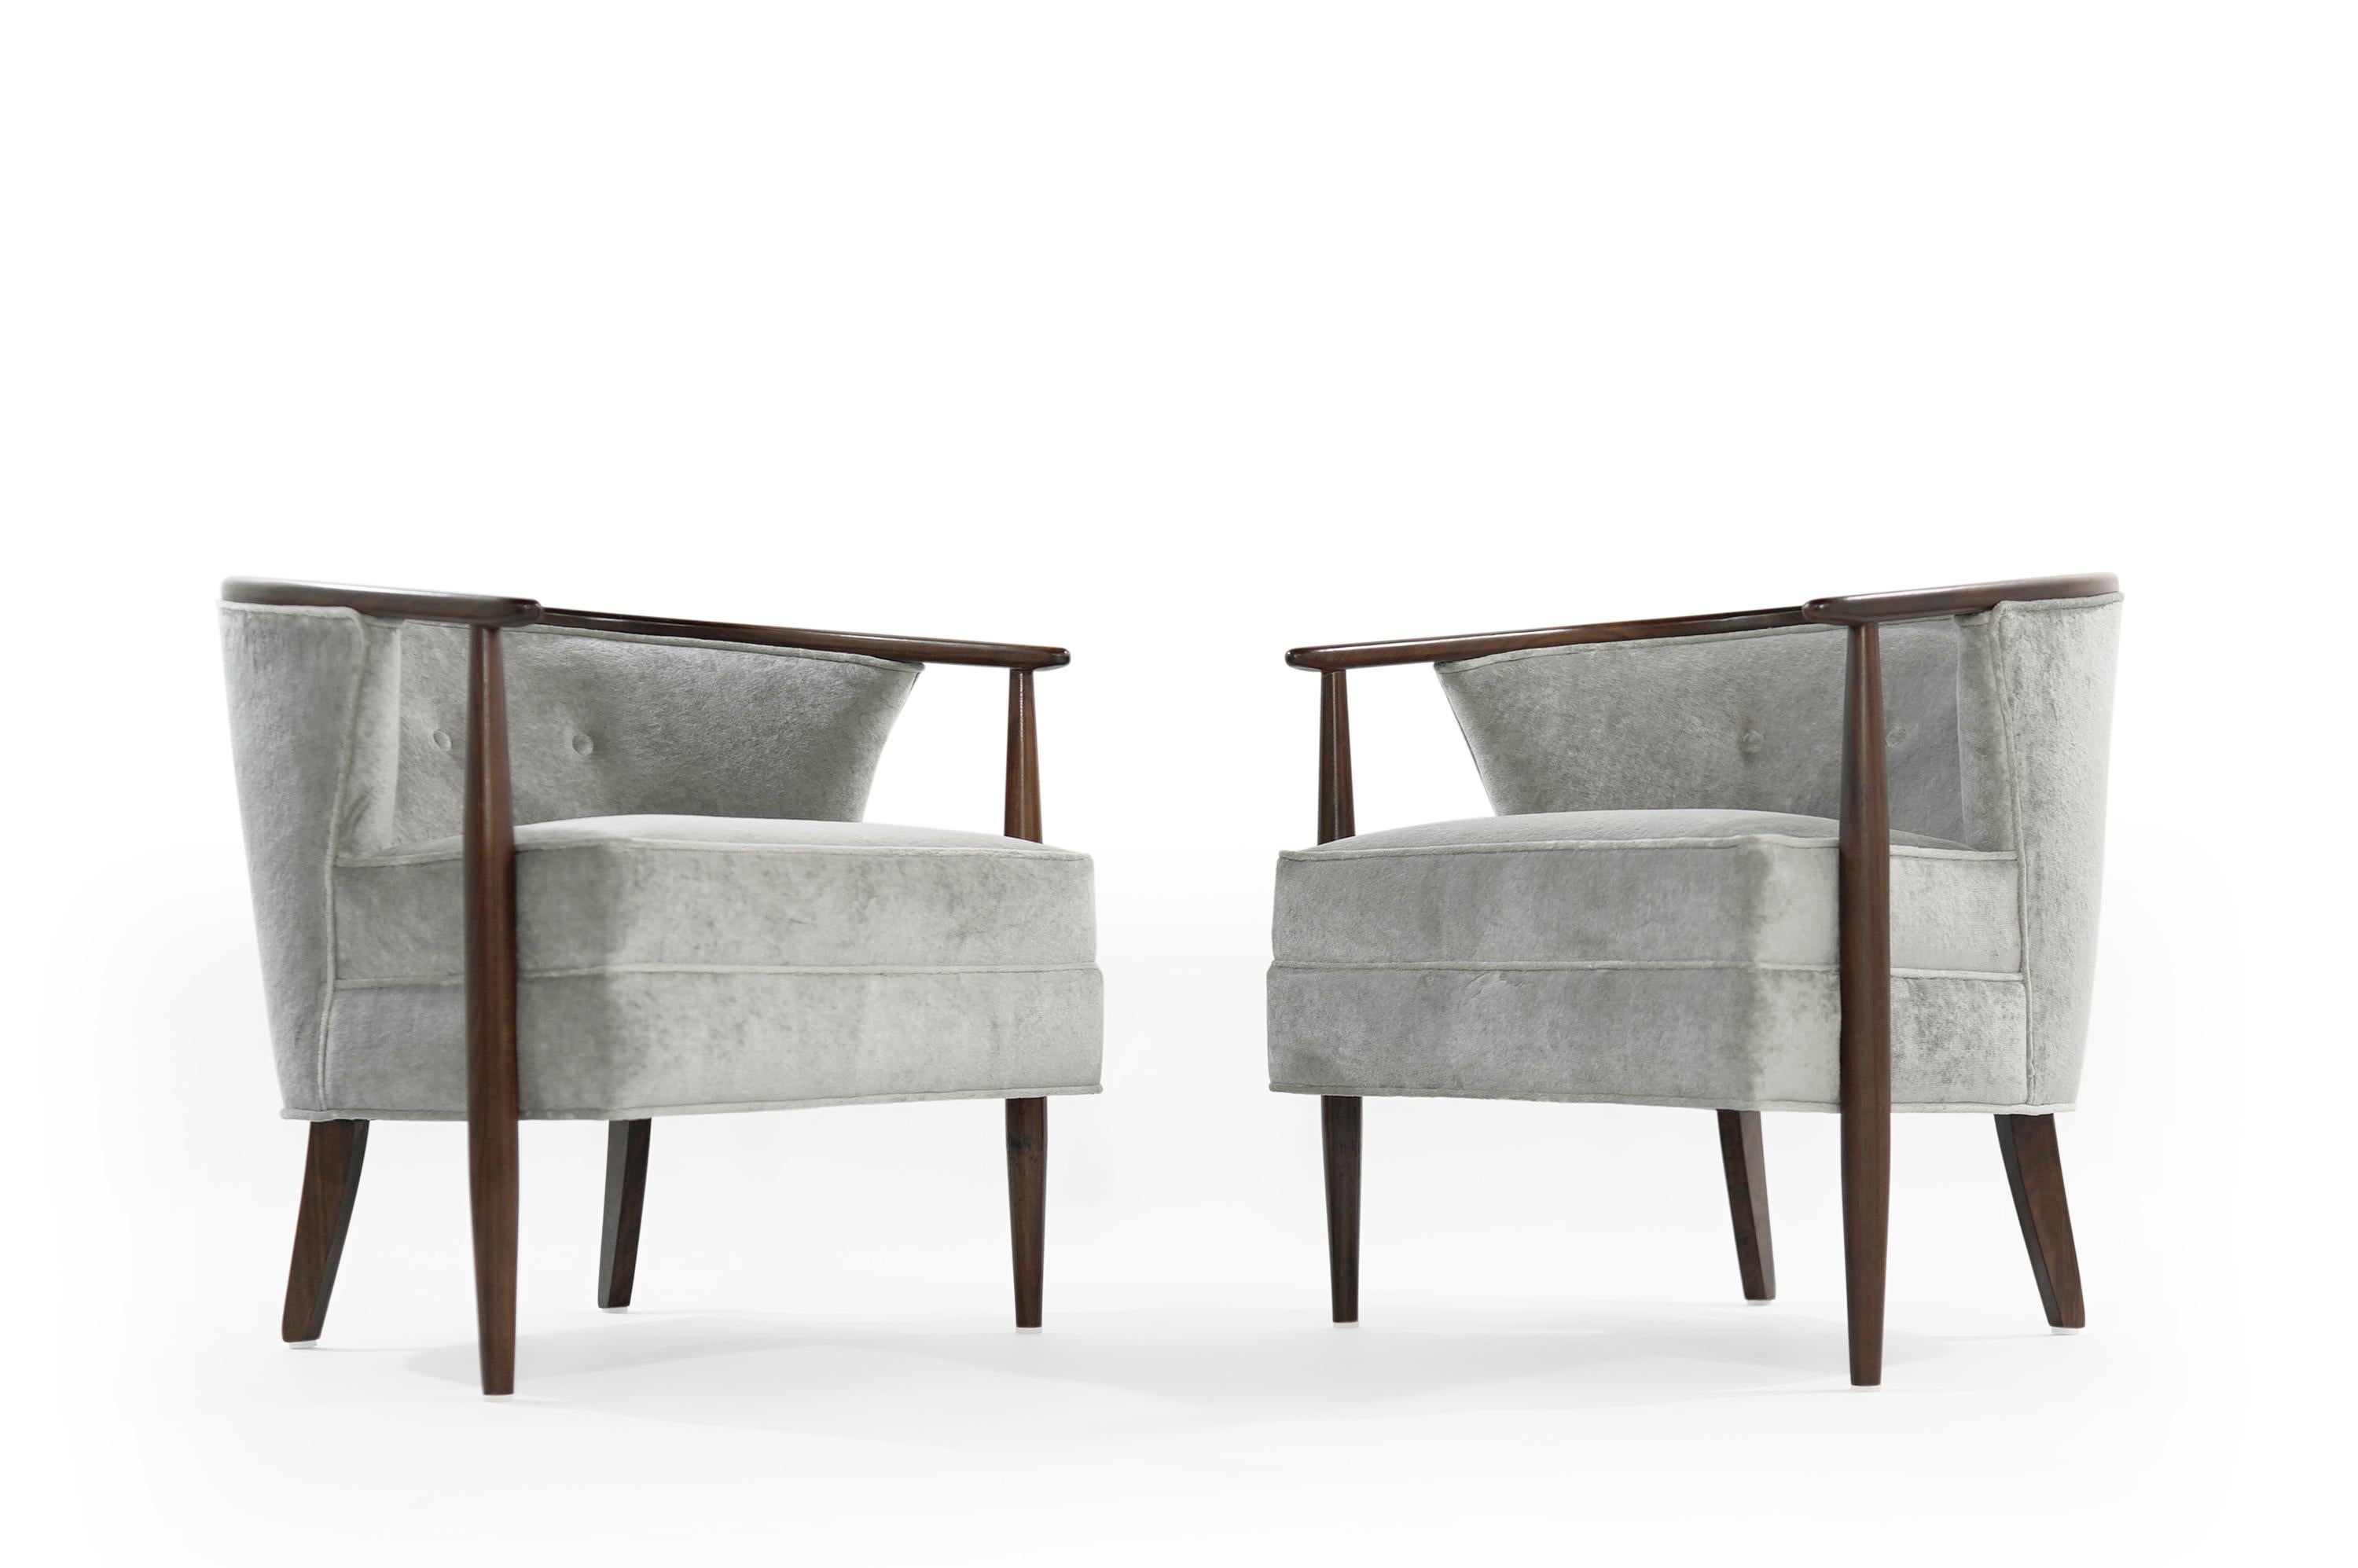 Pair of Scandinavian lounge chairs, newly upholstered in distressed grey linen by Holly Hunt. Exposed walnut frame work fully restored.